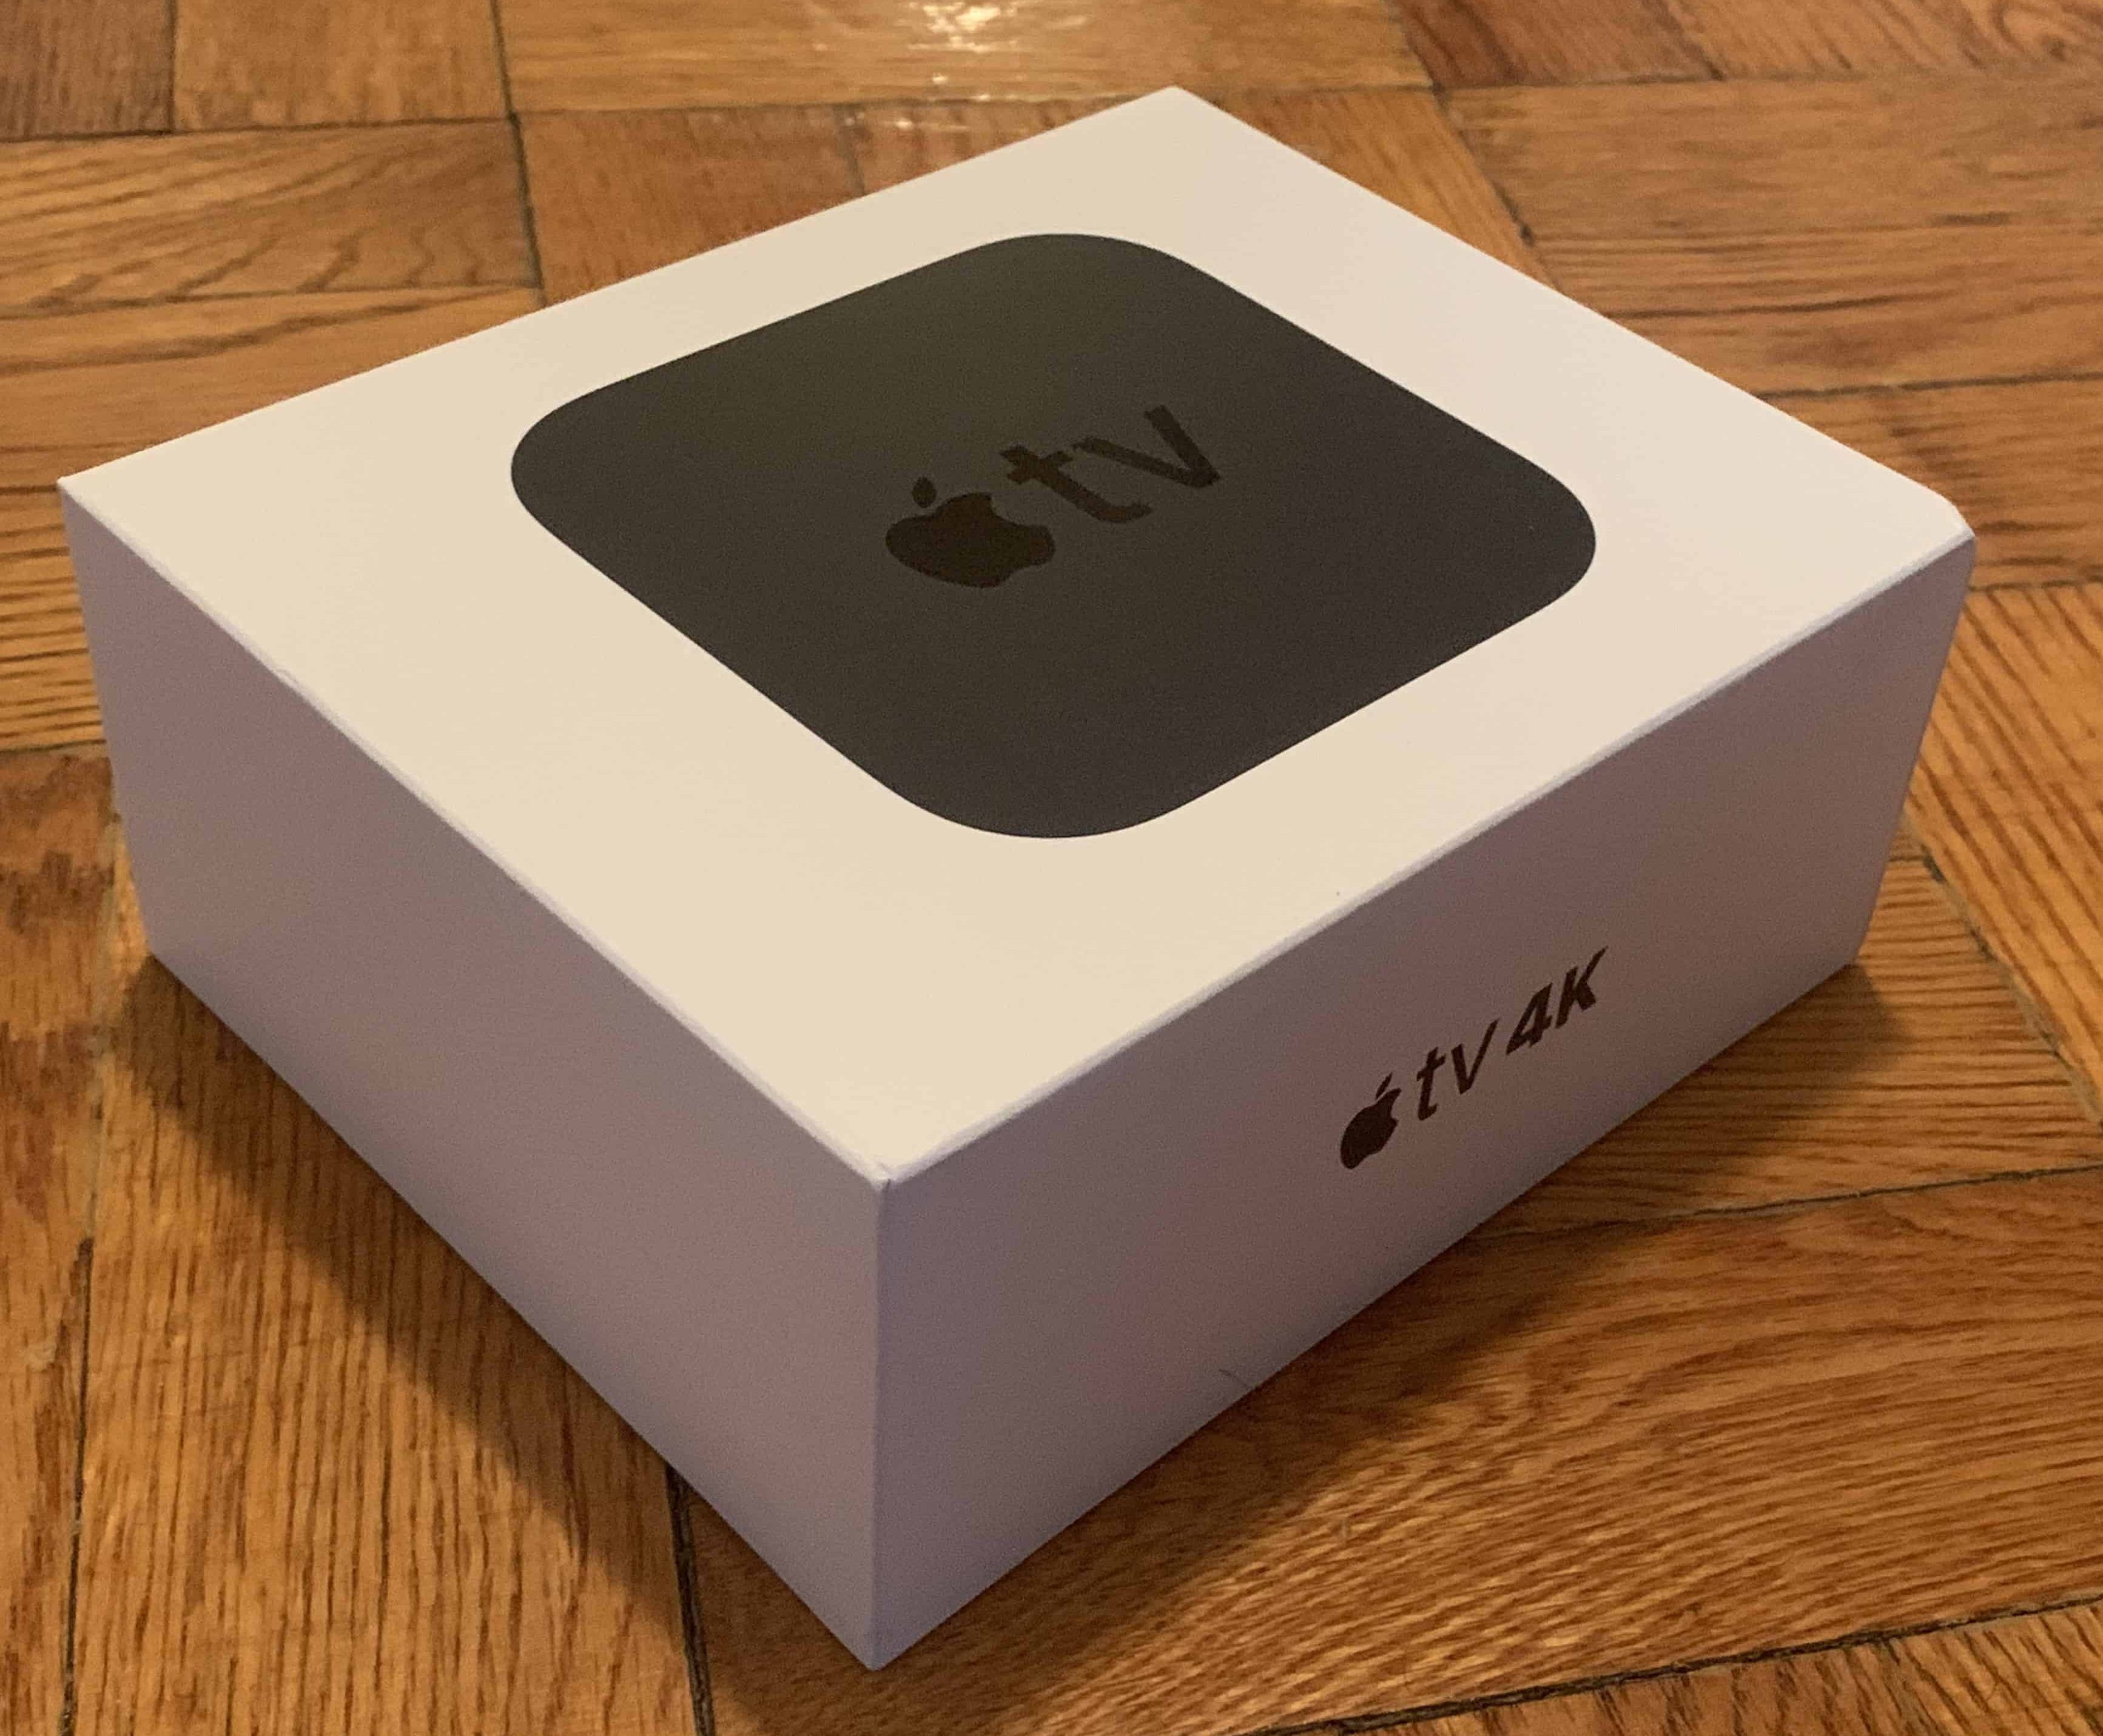 Apple TV 4k (NO Credit Needed!!) As low as 39$ down today!